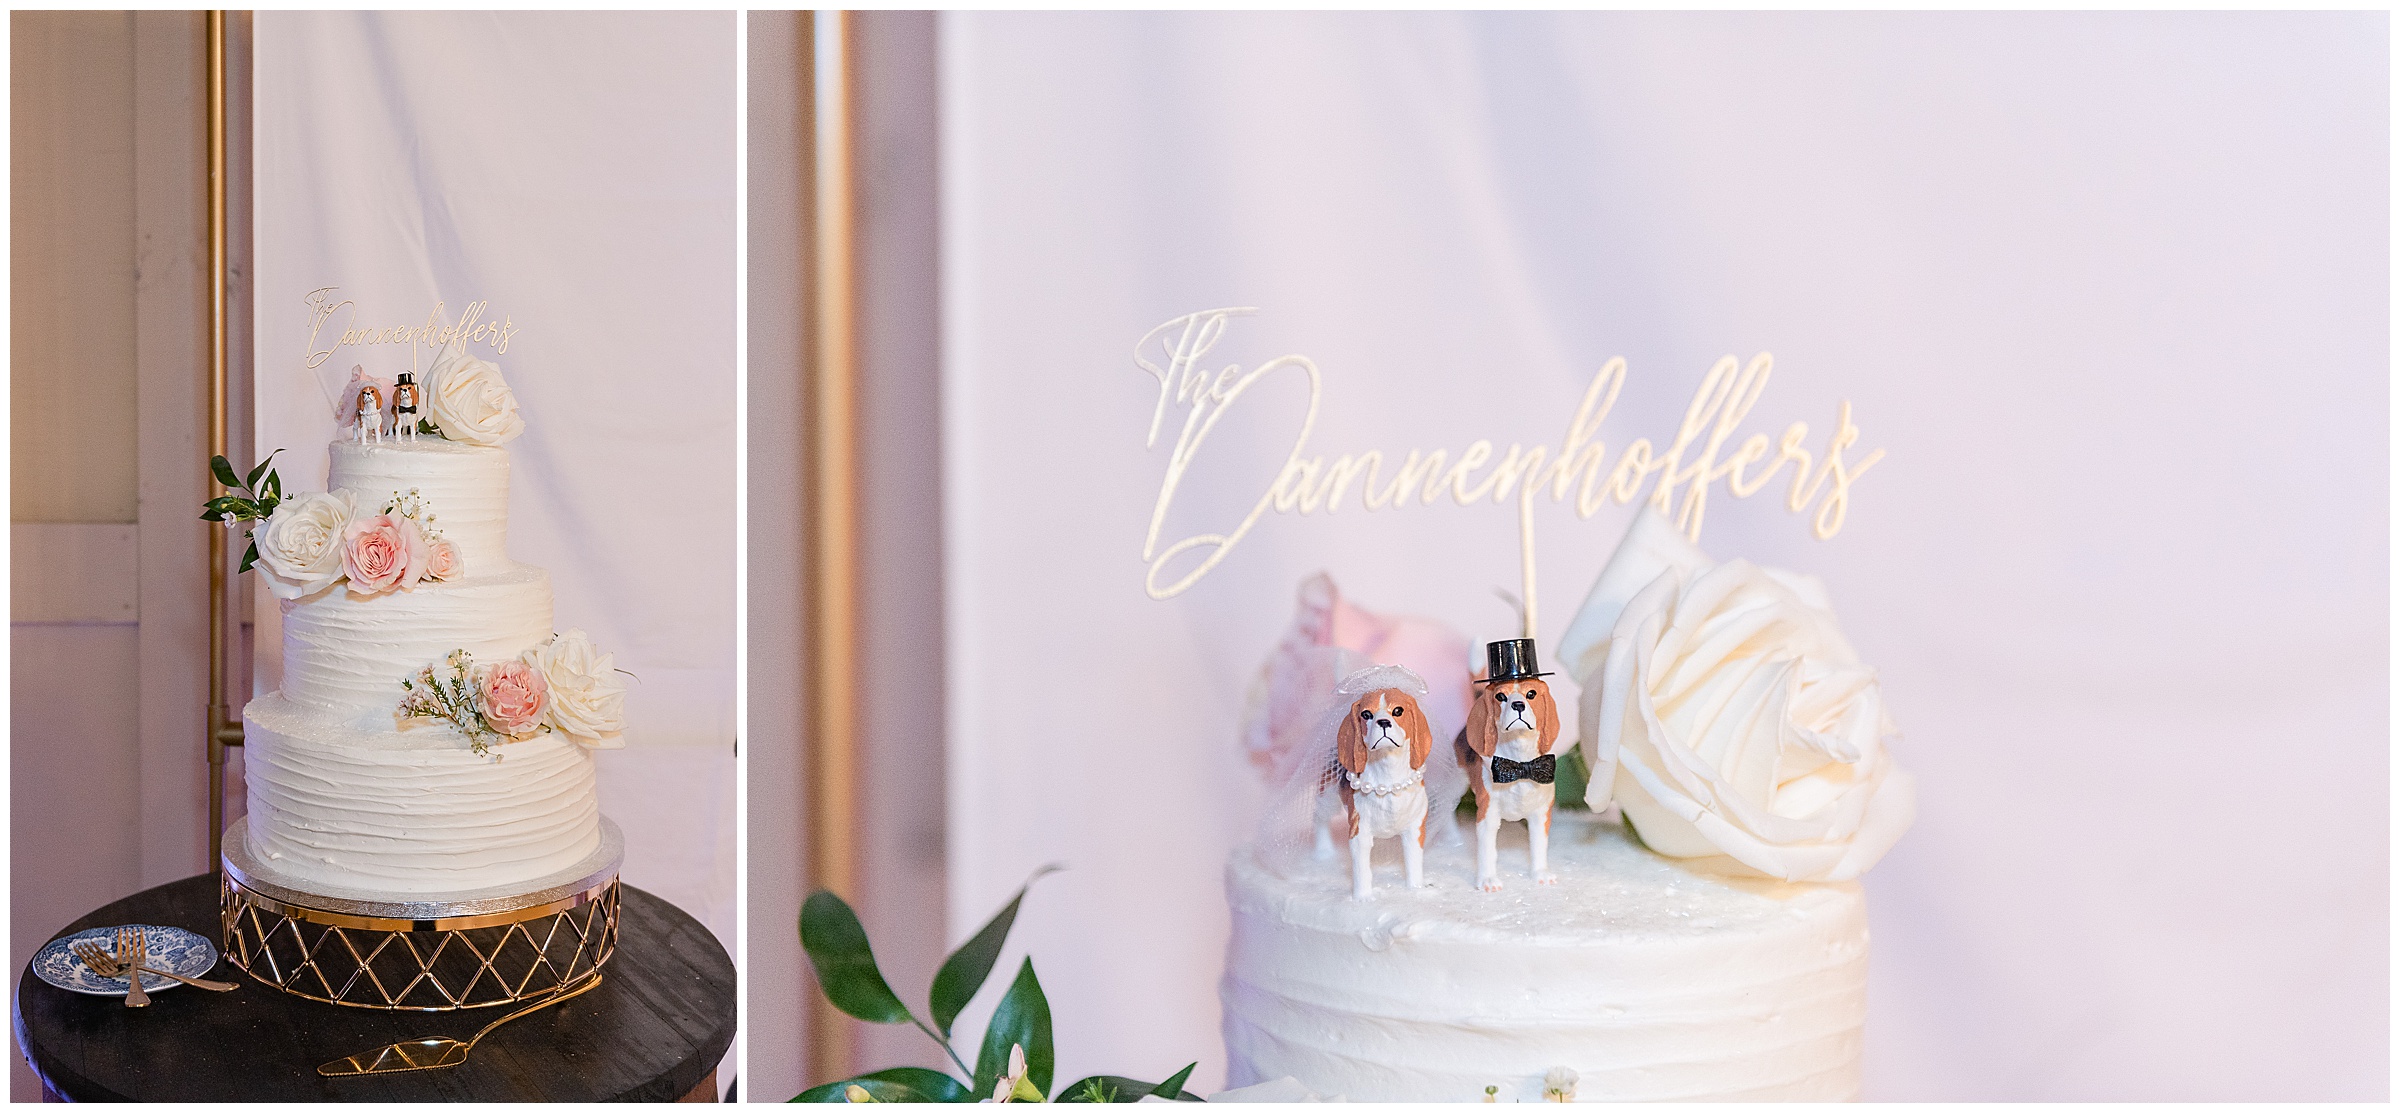 White wedding cake with beagle dog figurines on tip of the cake at a Magnolia Manor Wedding in Vero Beach